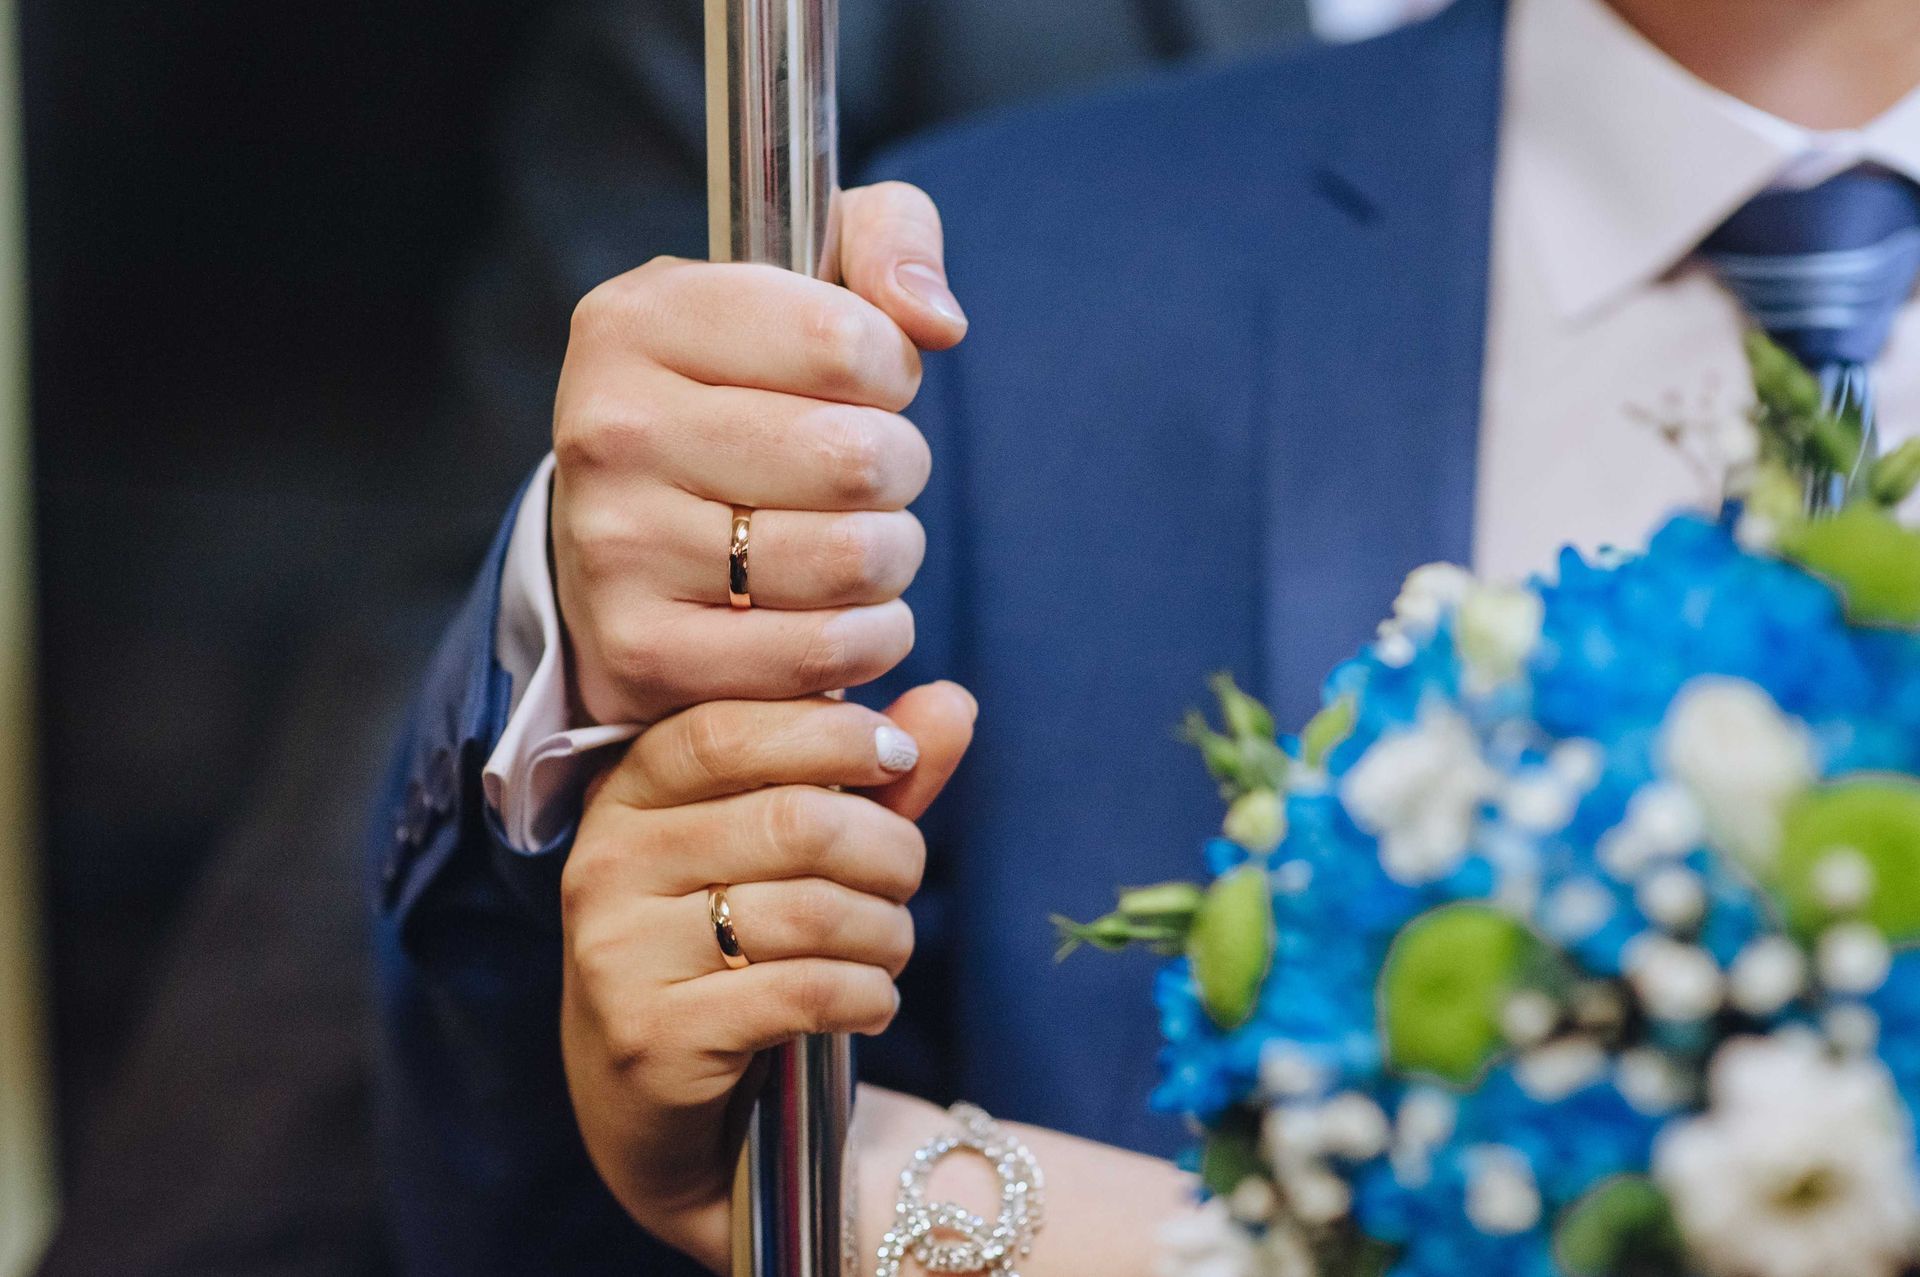 A couple with wedding bands holding on to a pole with hands